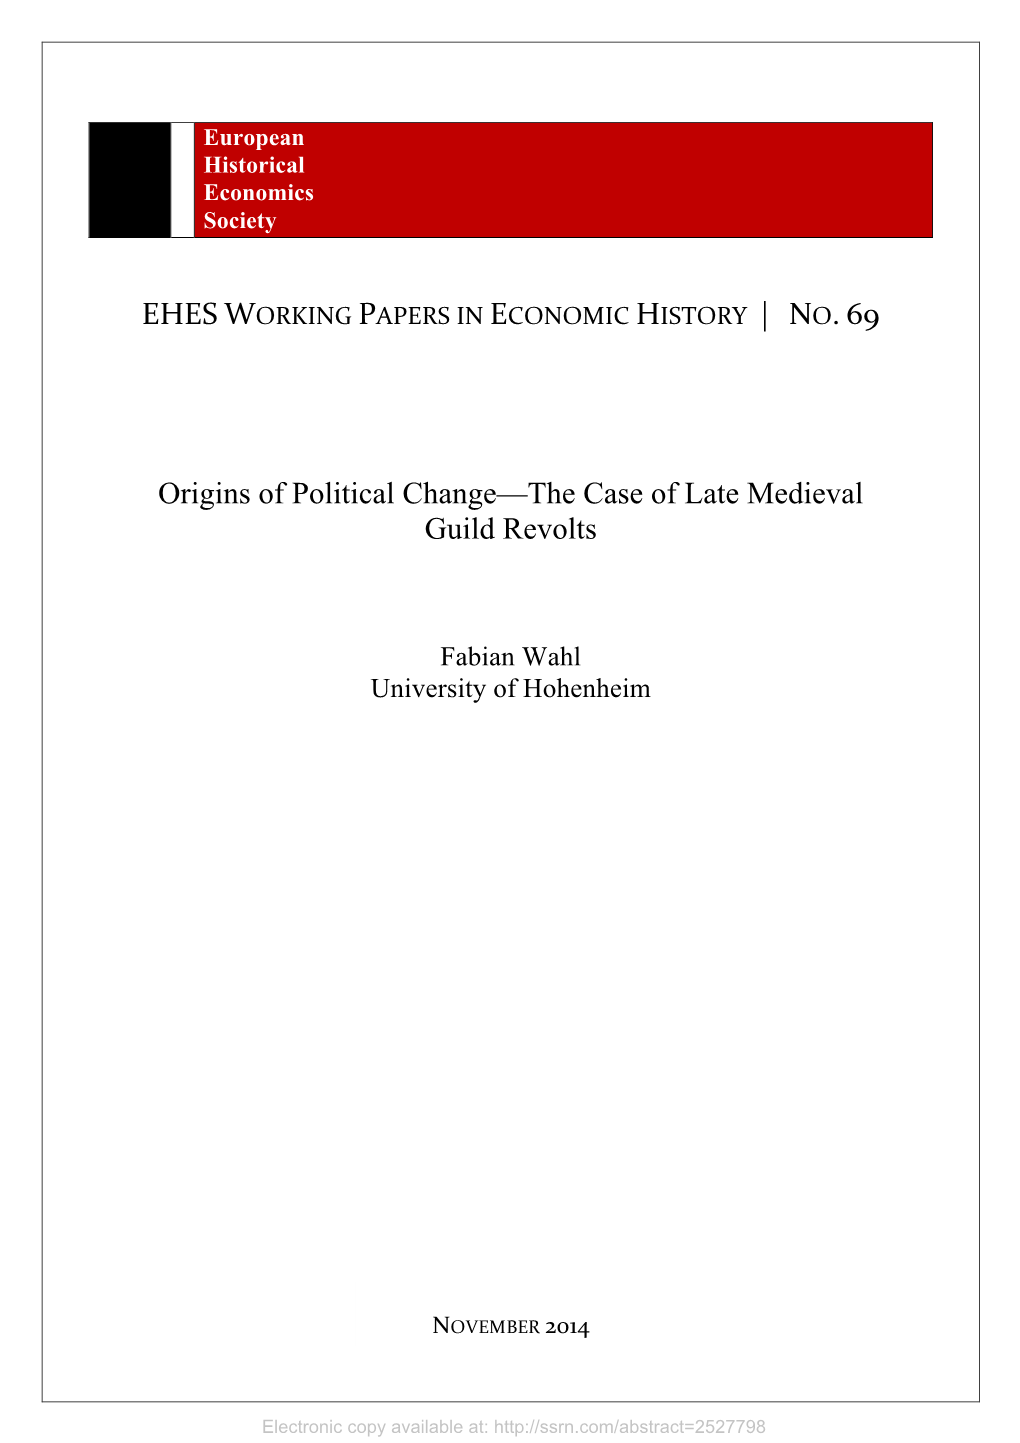 Origins of Political Change—The Case of Late Medieval Guild Revolts